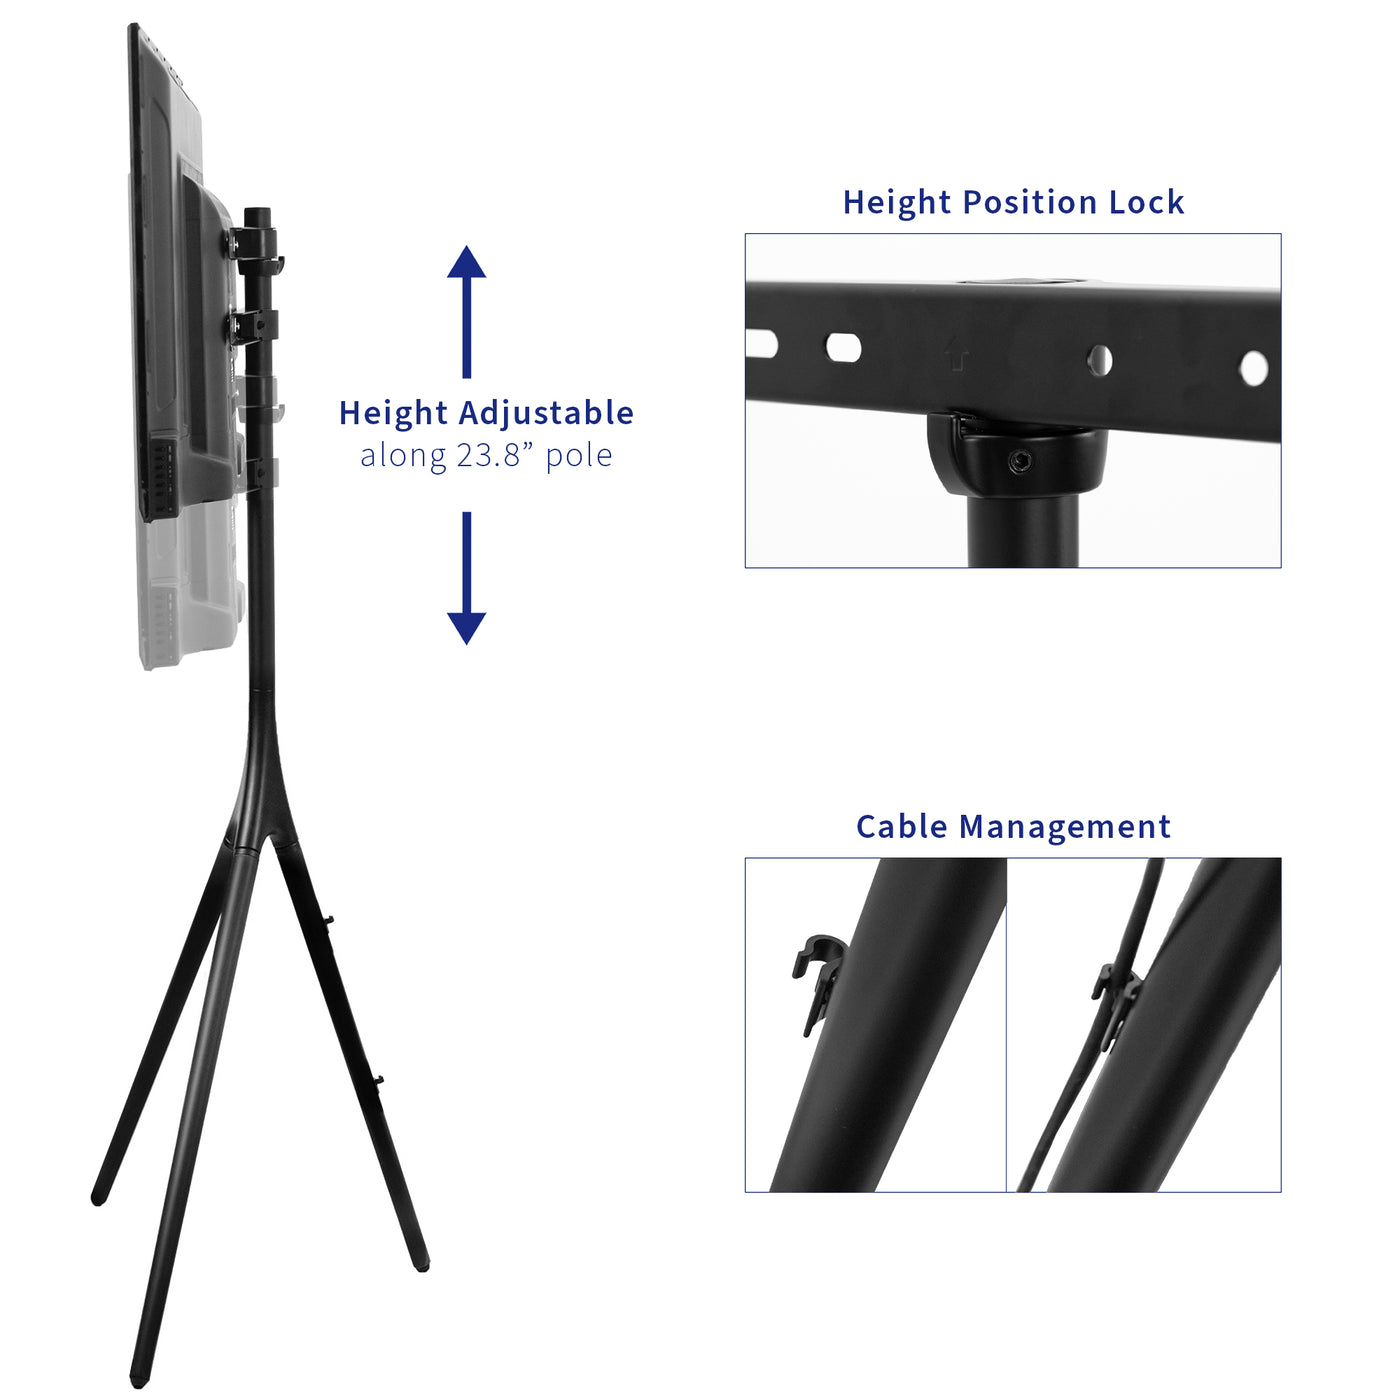 Height adjustable positions that lock in along the back center pole with cable management.